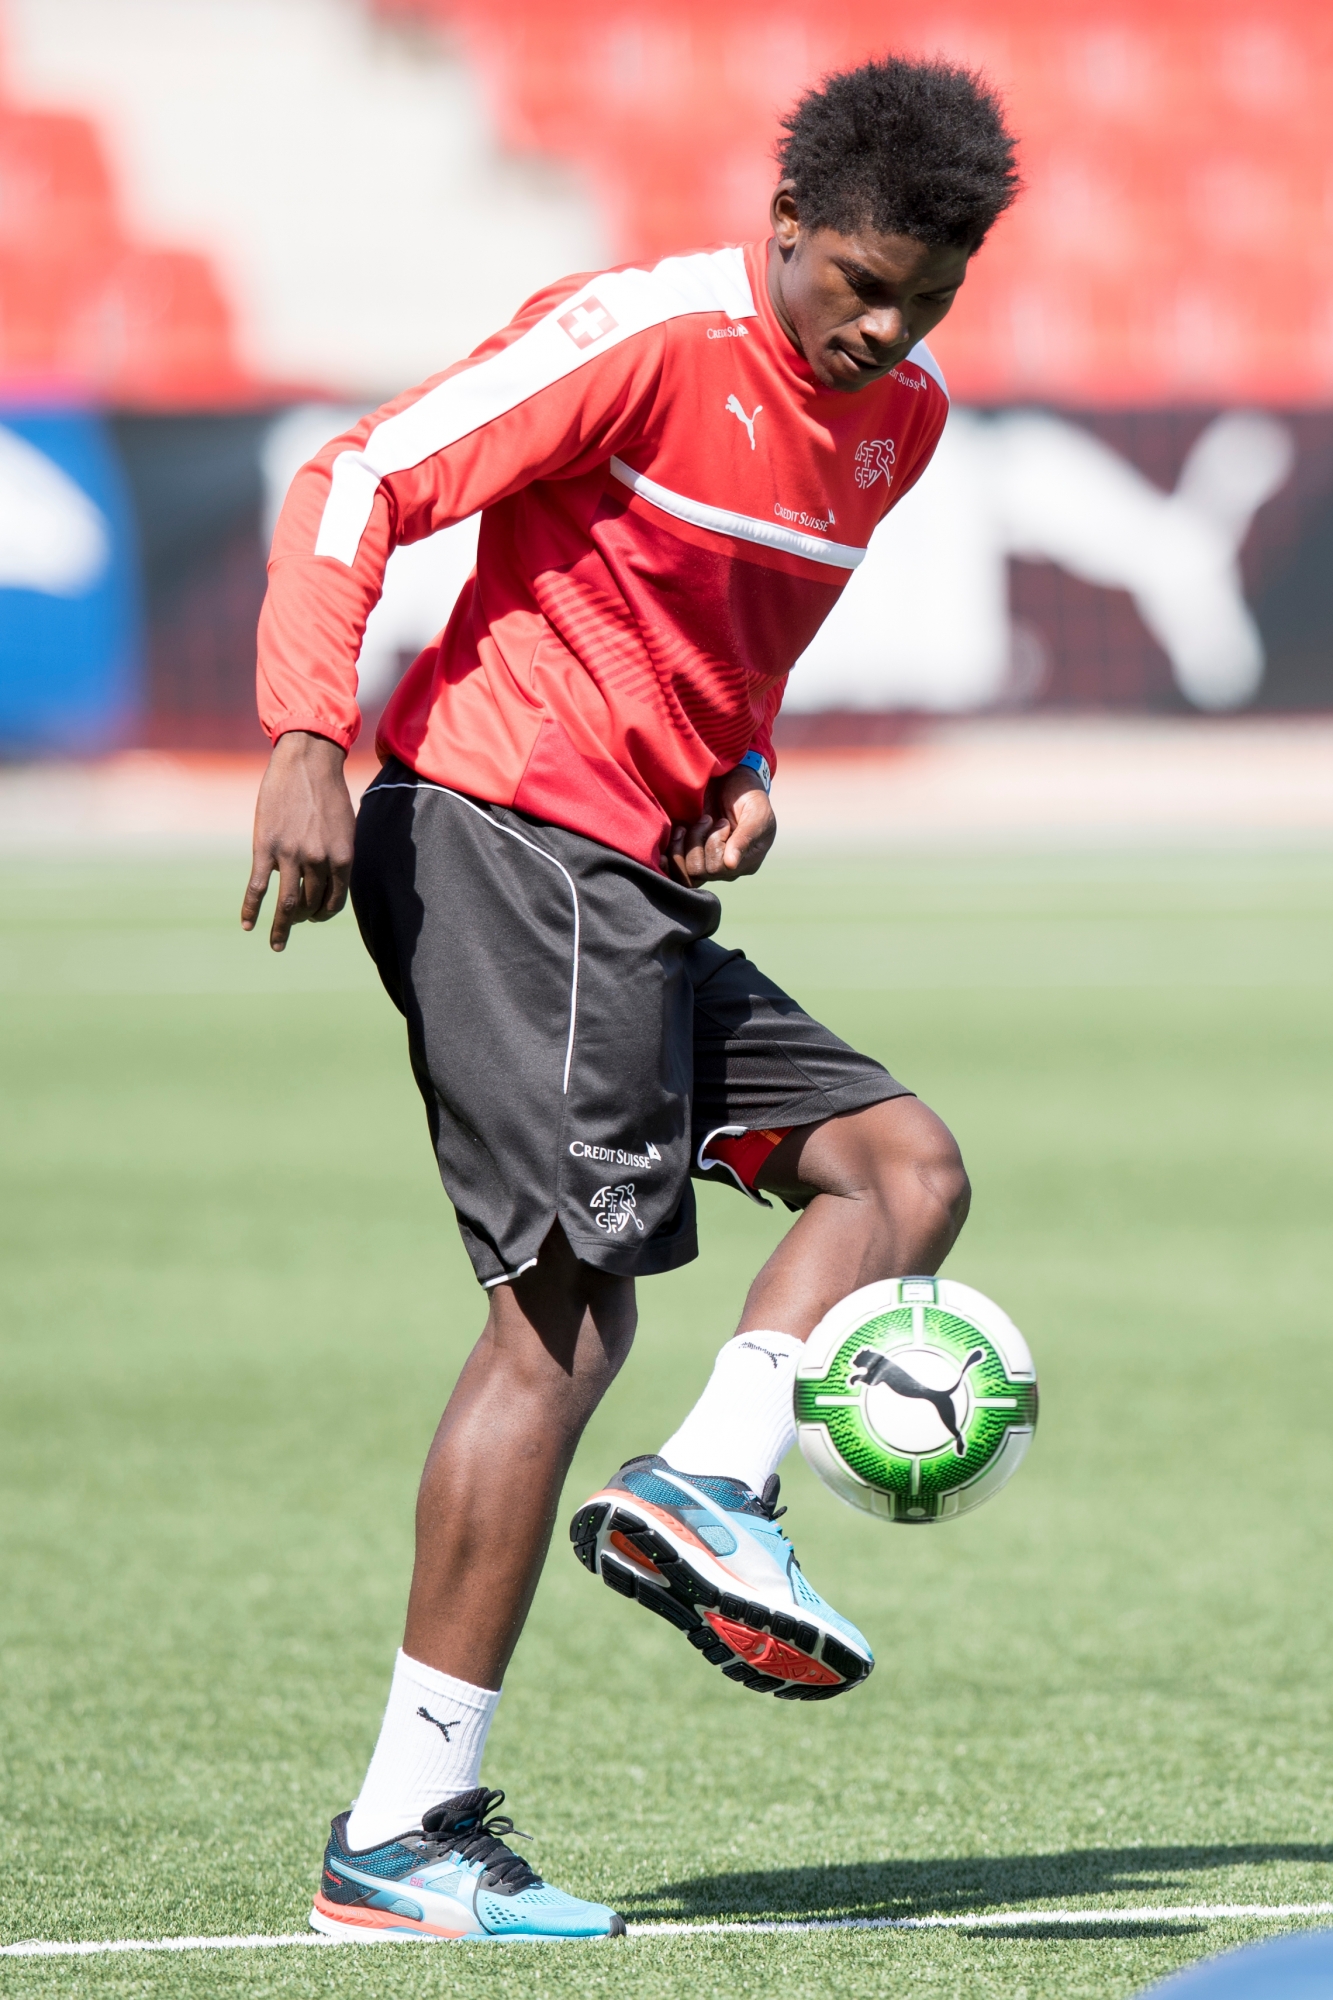 Swiss forward Breel Embolo plays the ball during a training during the Swiss soccer national team training session, at the Stadium Maladiere, in Neuchatel, Switzerland, Thursday, May 25, 2017. Switzerland will play Belarus on June 1st in Neuchatel for a friendly soccer match on the side line of the 2018 Fifa World Cup group B qualification. (KEYSTONE/Anthony Anex) SWITZERLAND SOCCER SWISS TEAM TRAINING